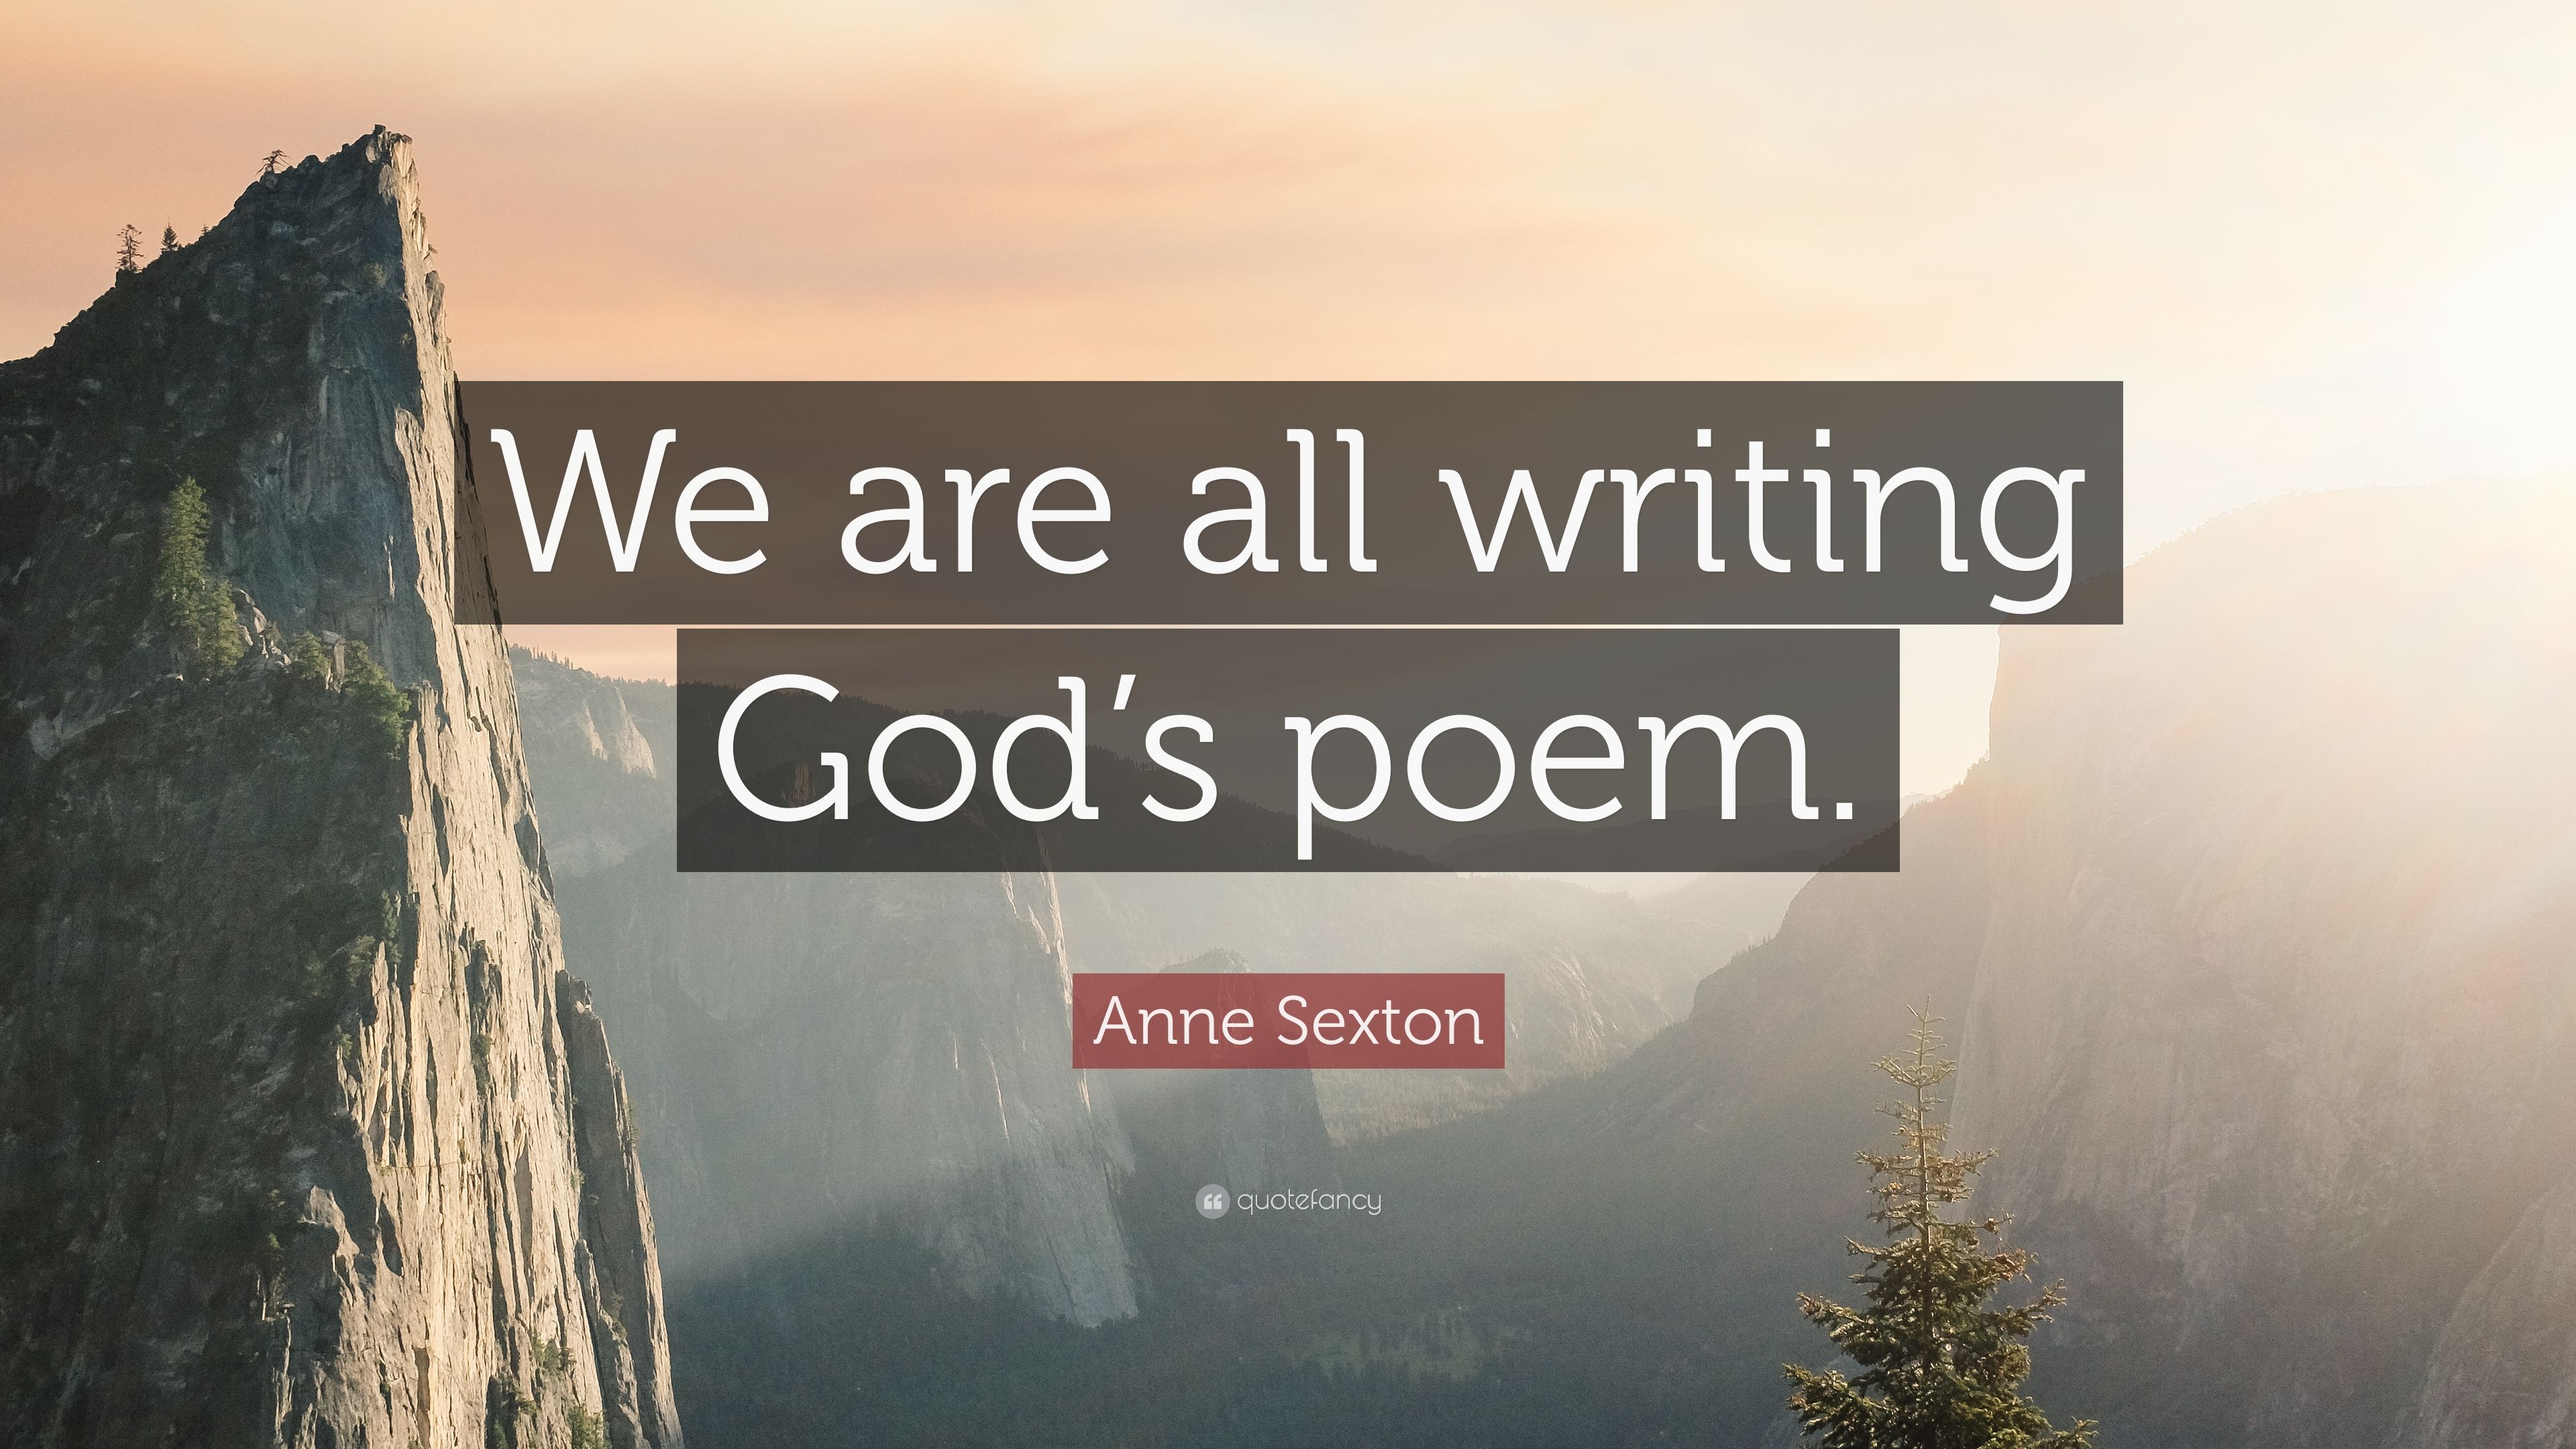 Anne Sexton Quote: “We are all writing God's poem.” 6 wallpaper